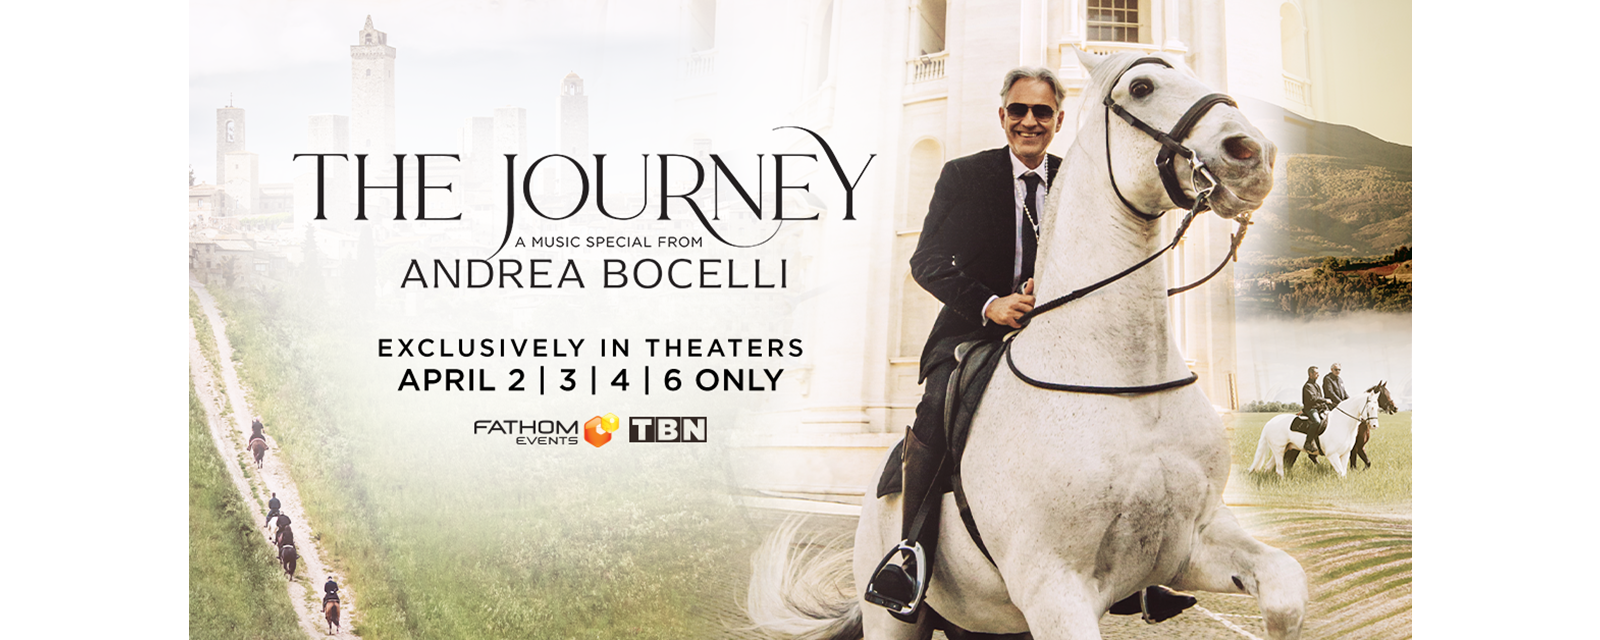 The Journey: A Music Special with Andrea Bocelli